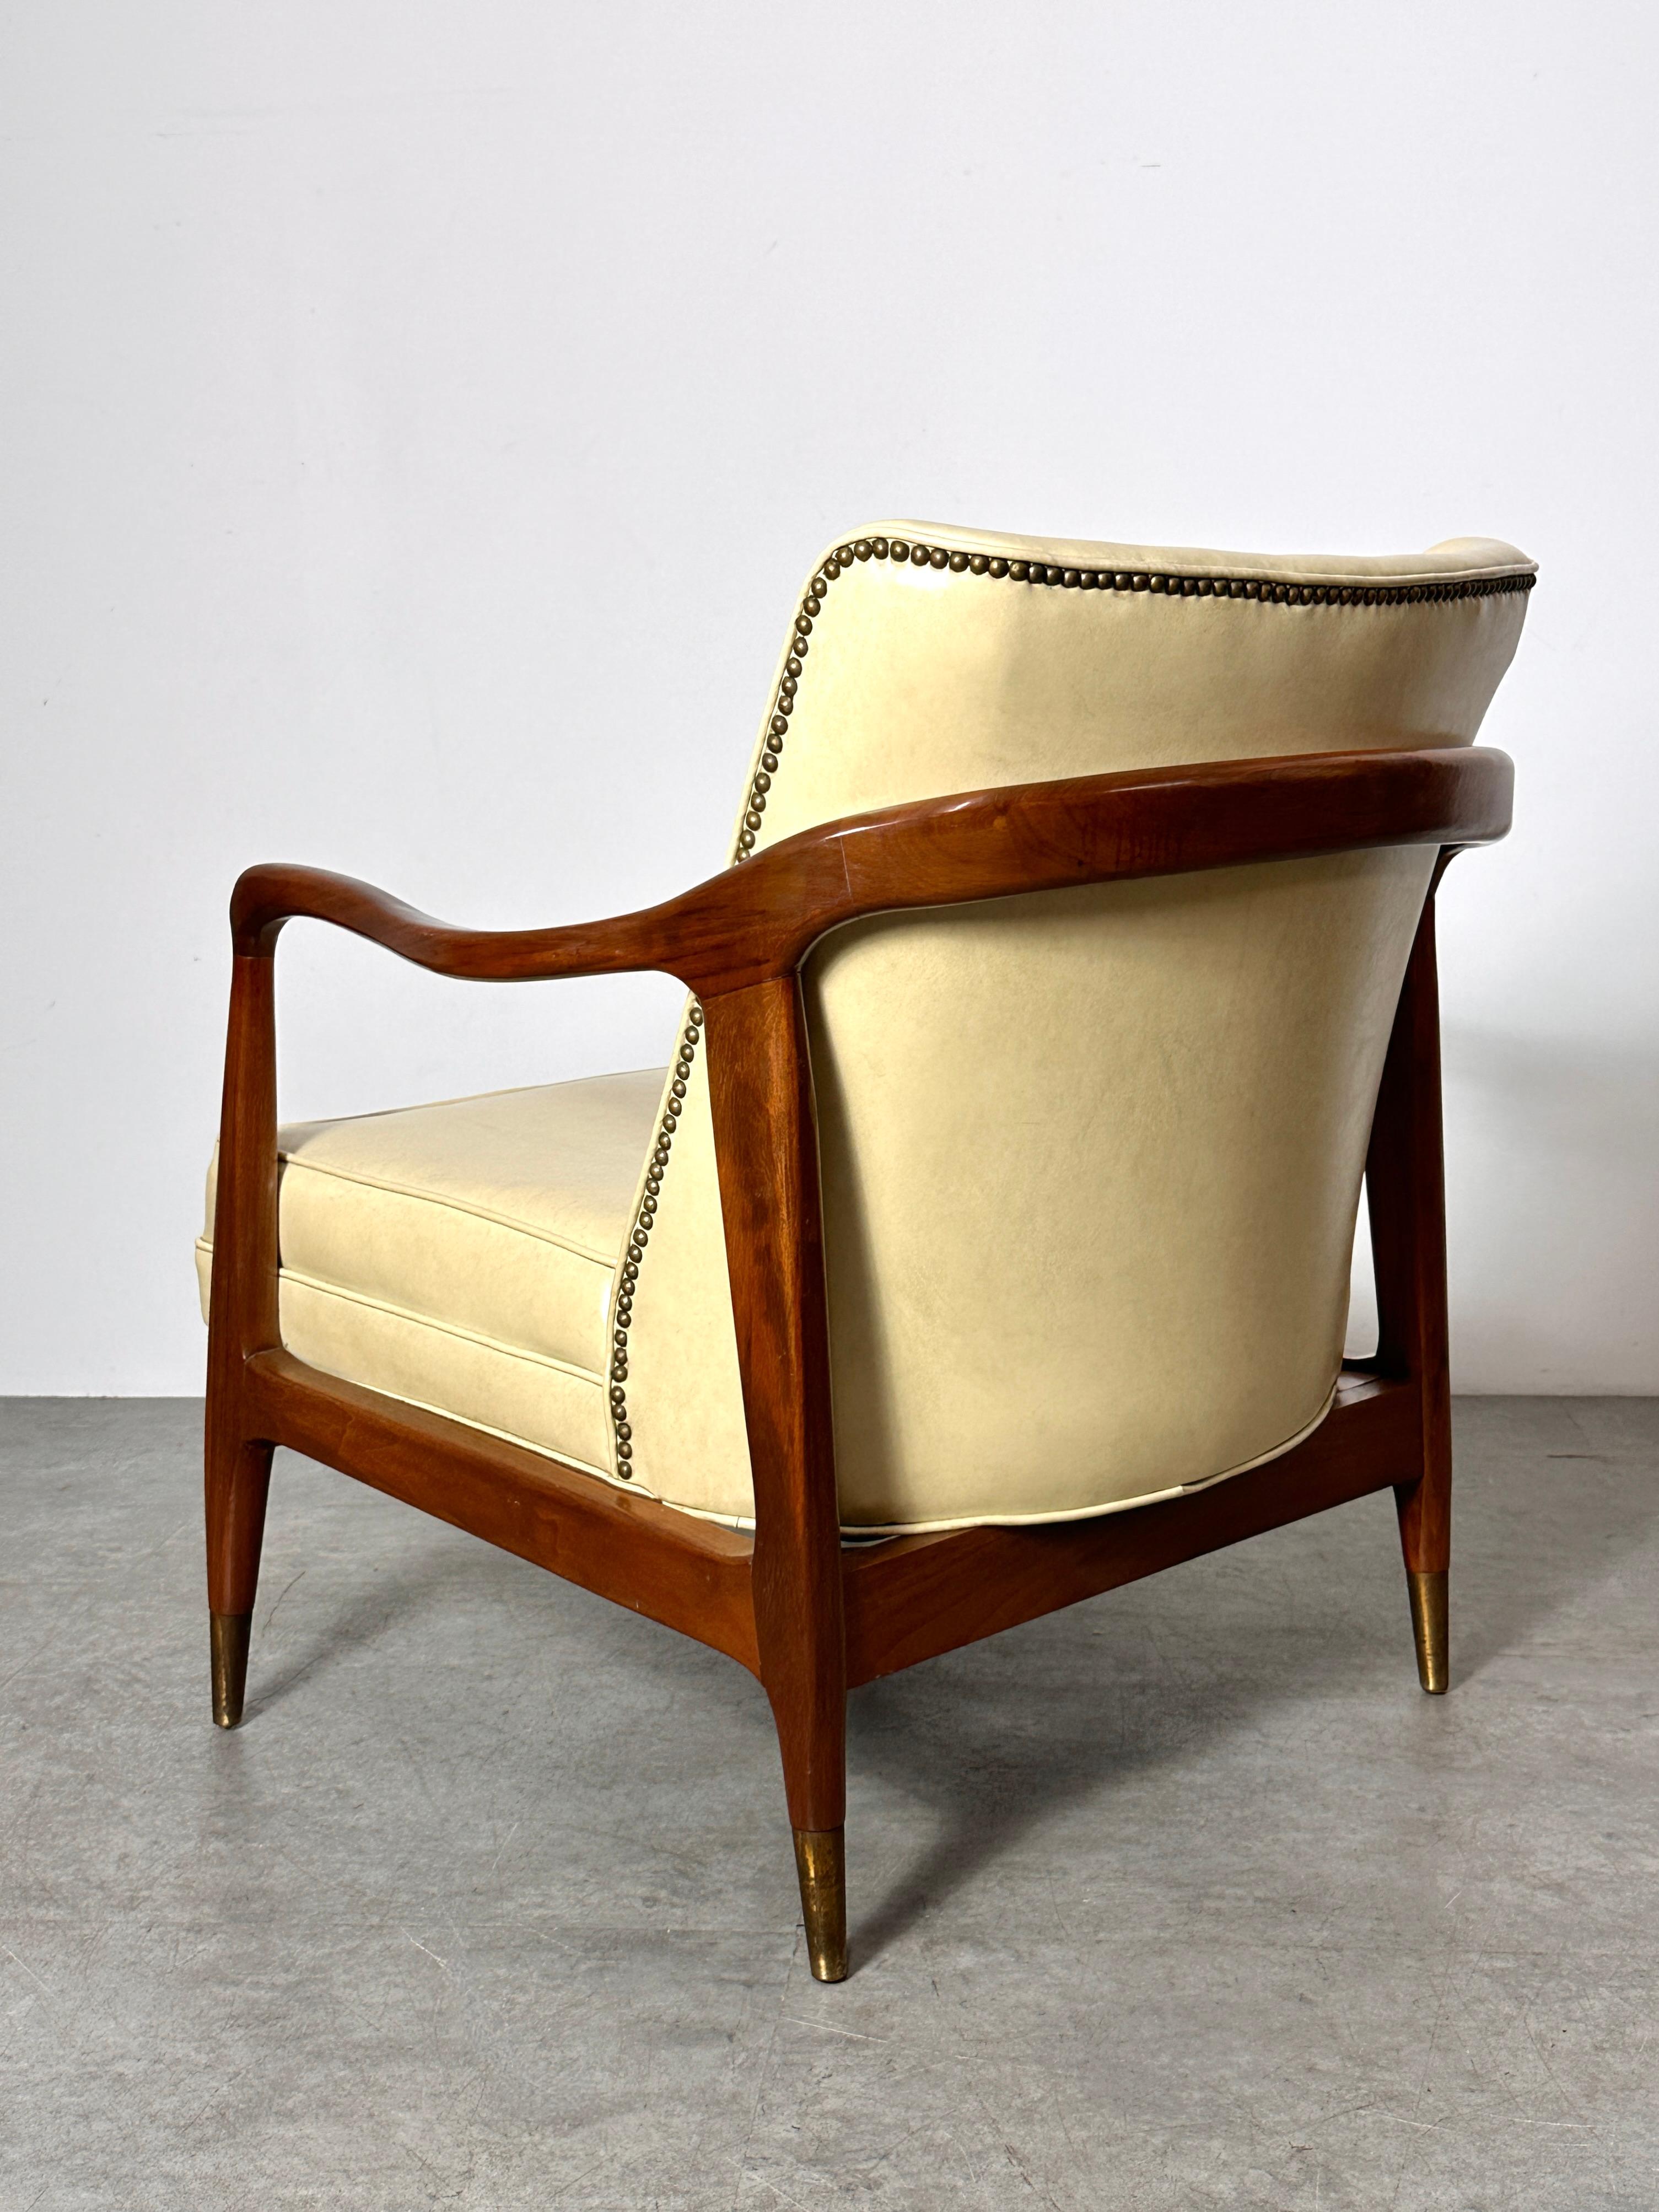 Mid Century Sculptural Walnut Brass Lounge Chair Gio Ponti Style 1950s For Sale 2